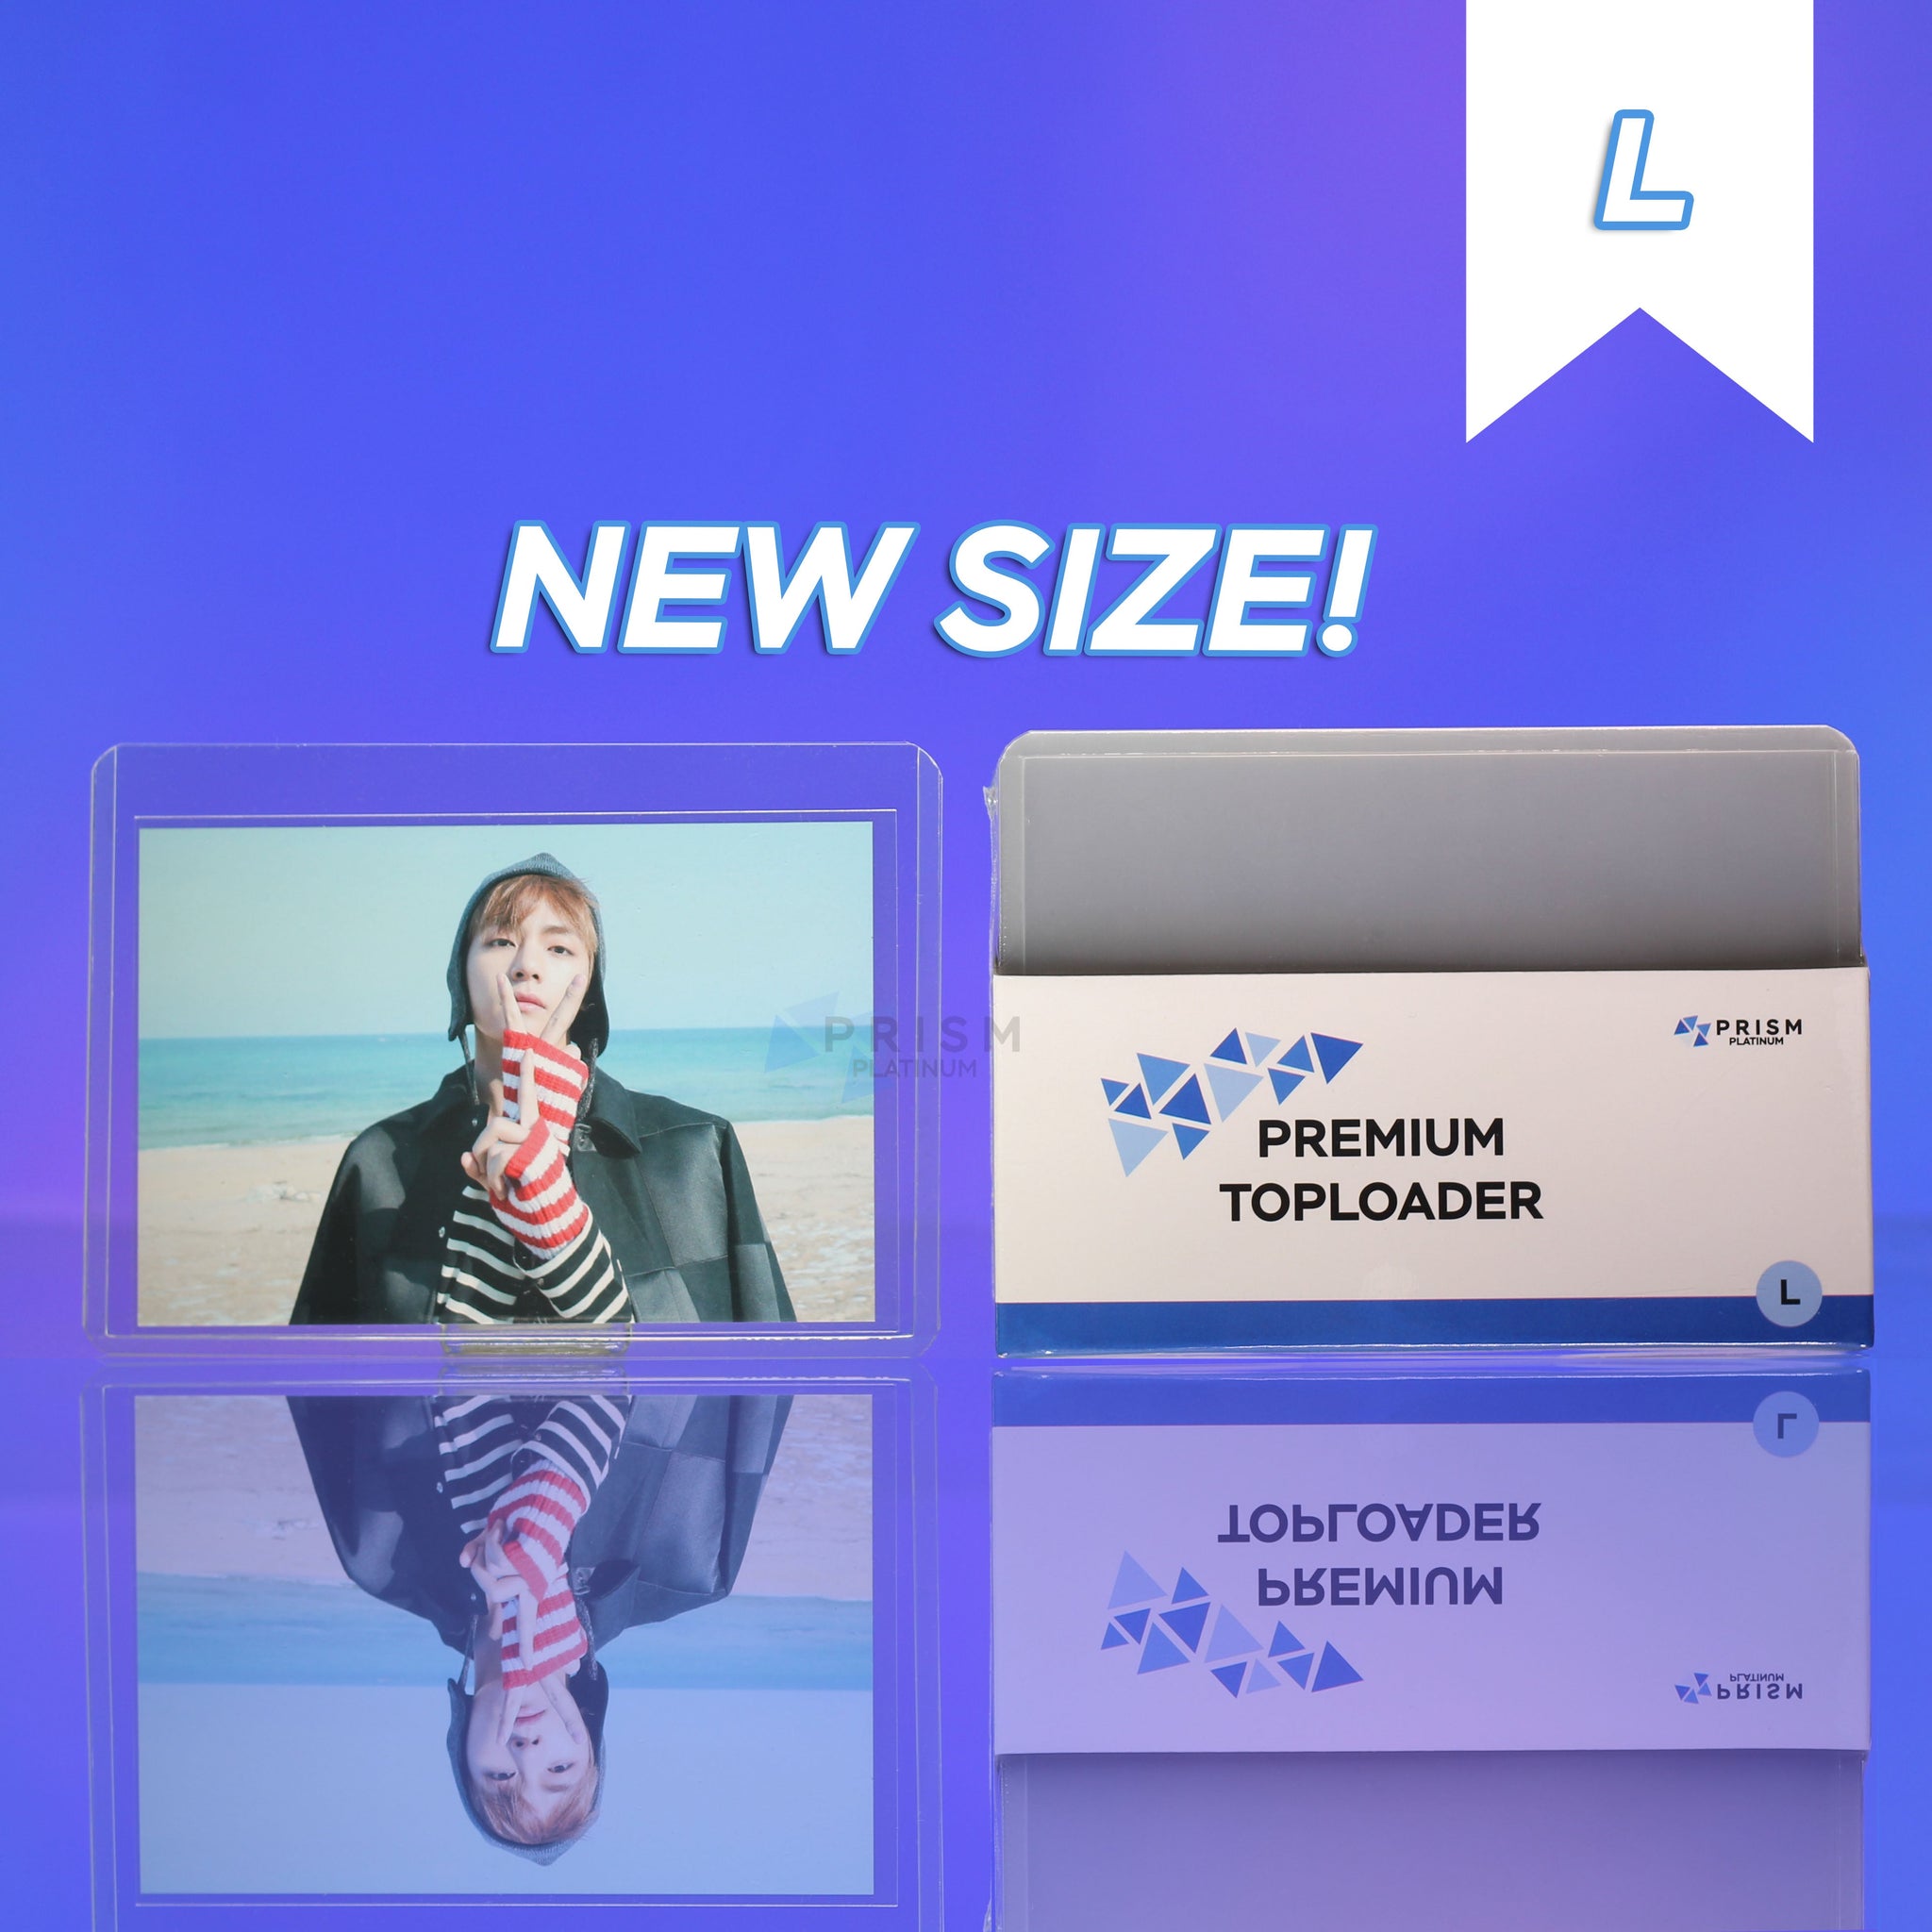 Premium Clear Toploader [Photocard Single Sleeve Perfect Fit] Inner Si